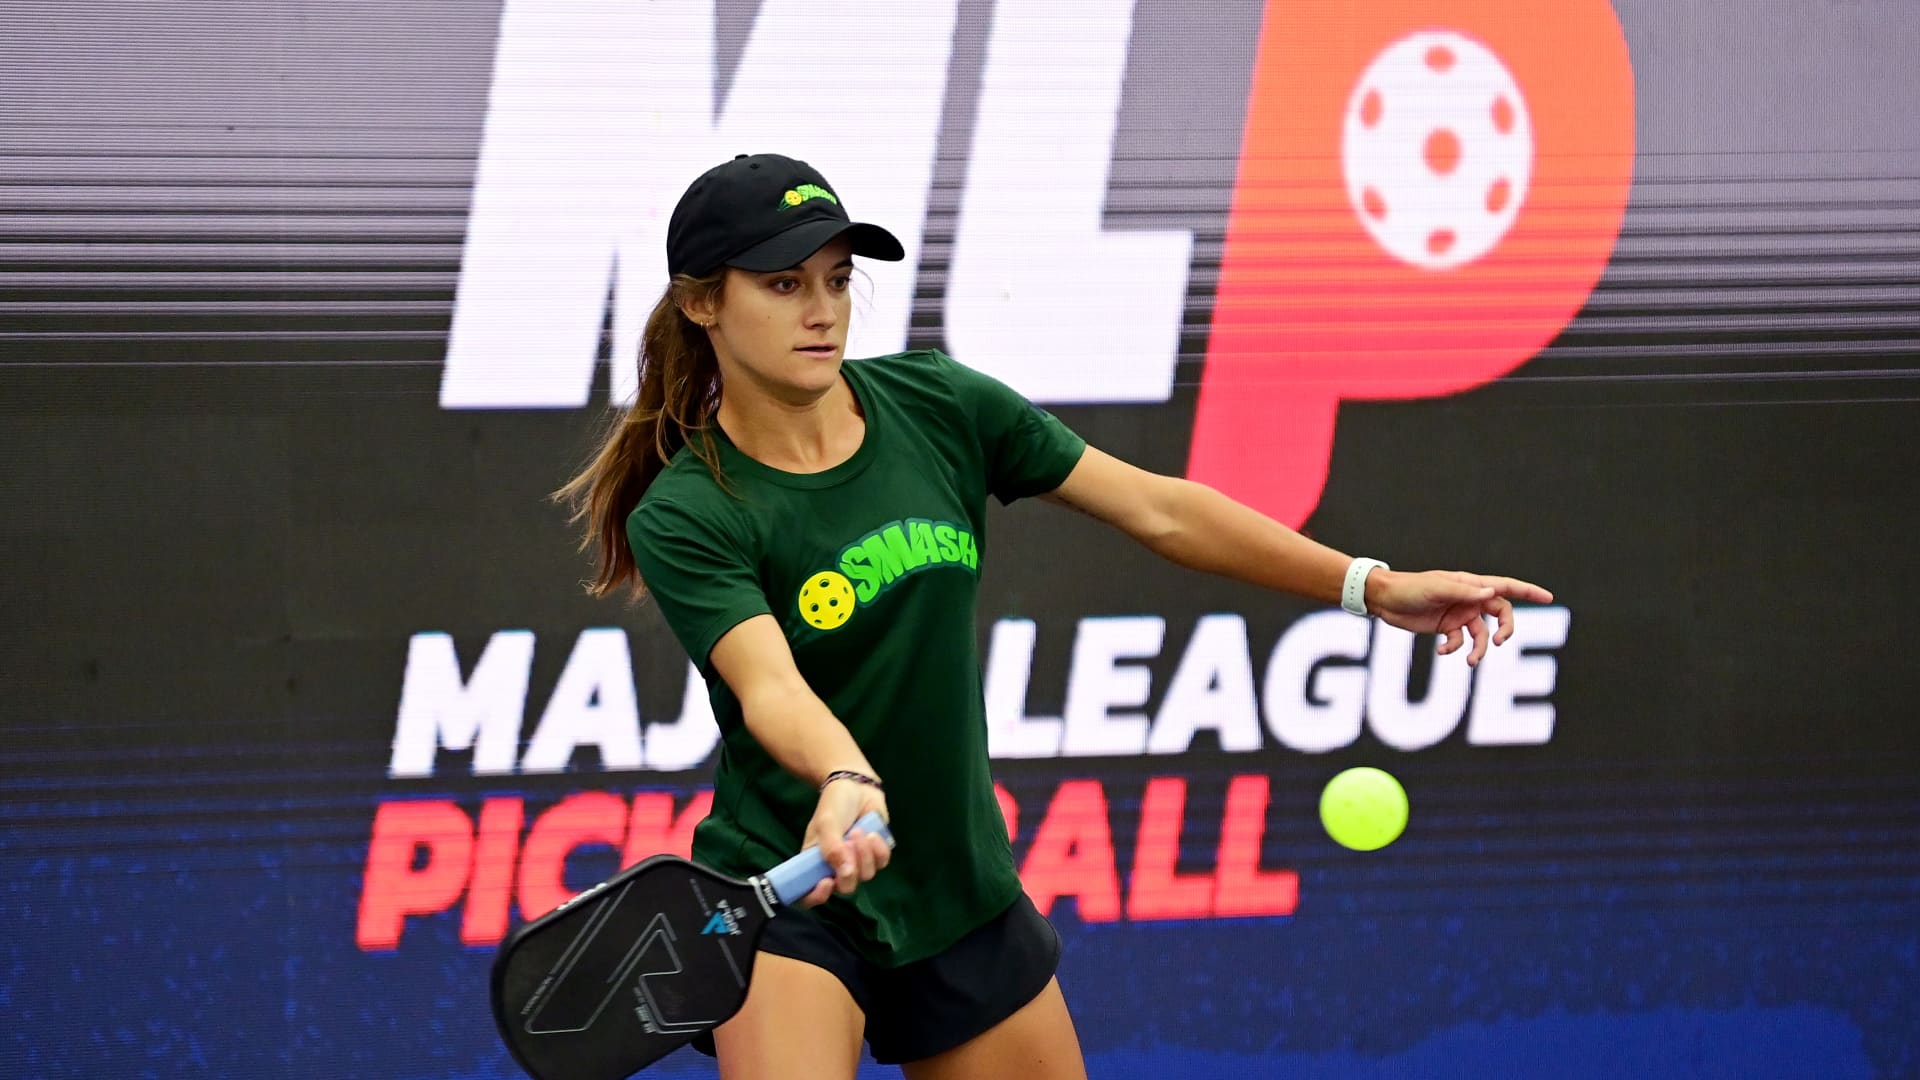 Major League Pickleball and PPA Tour complete merger